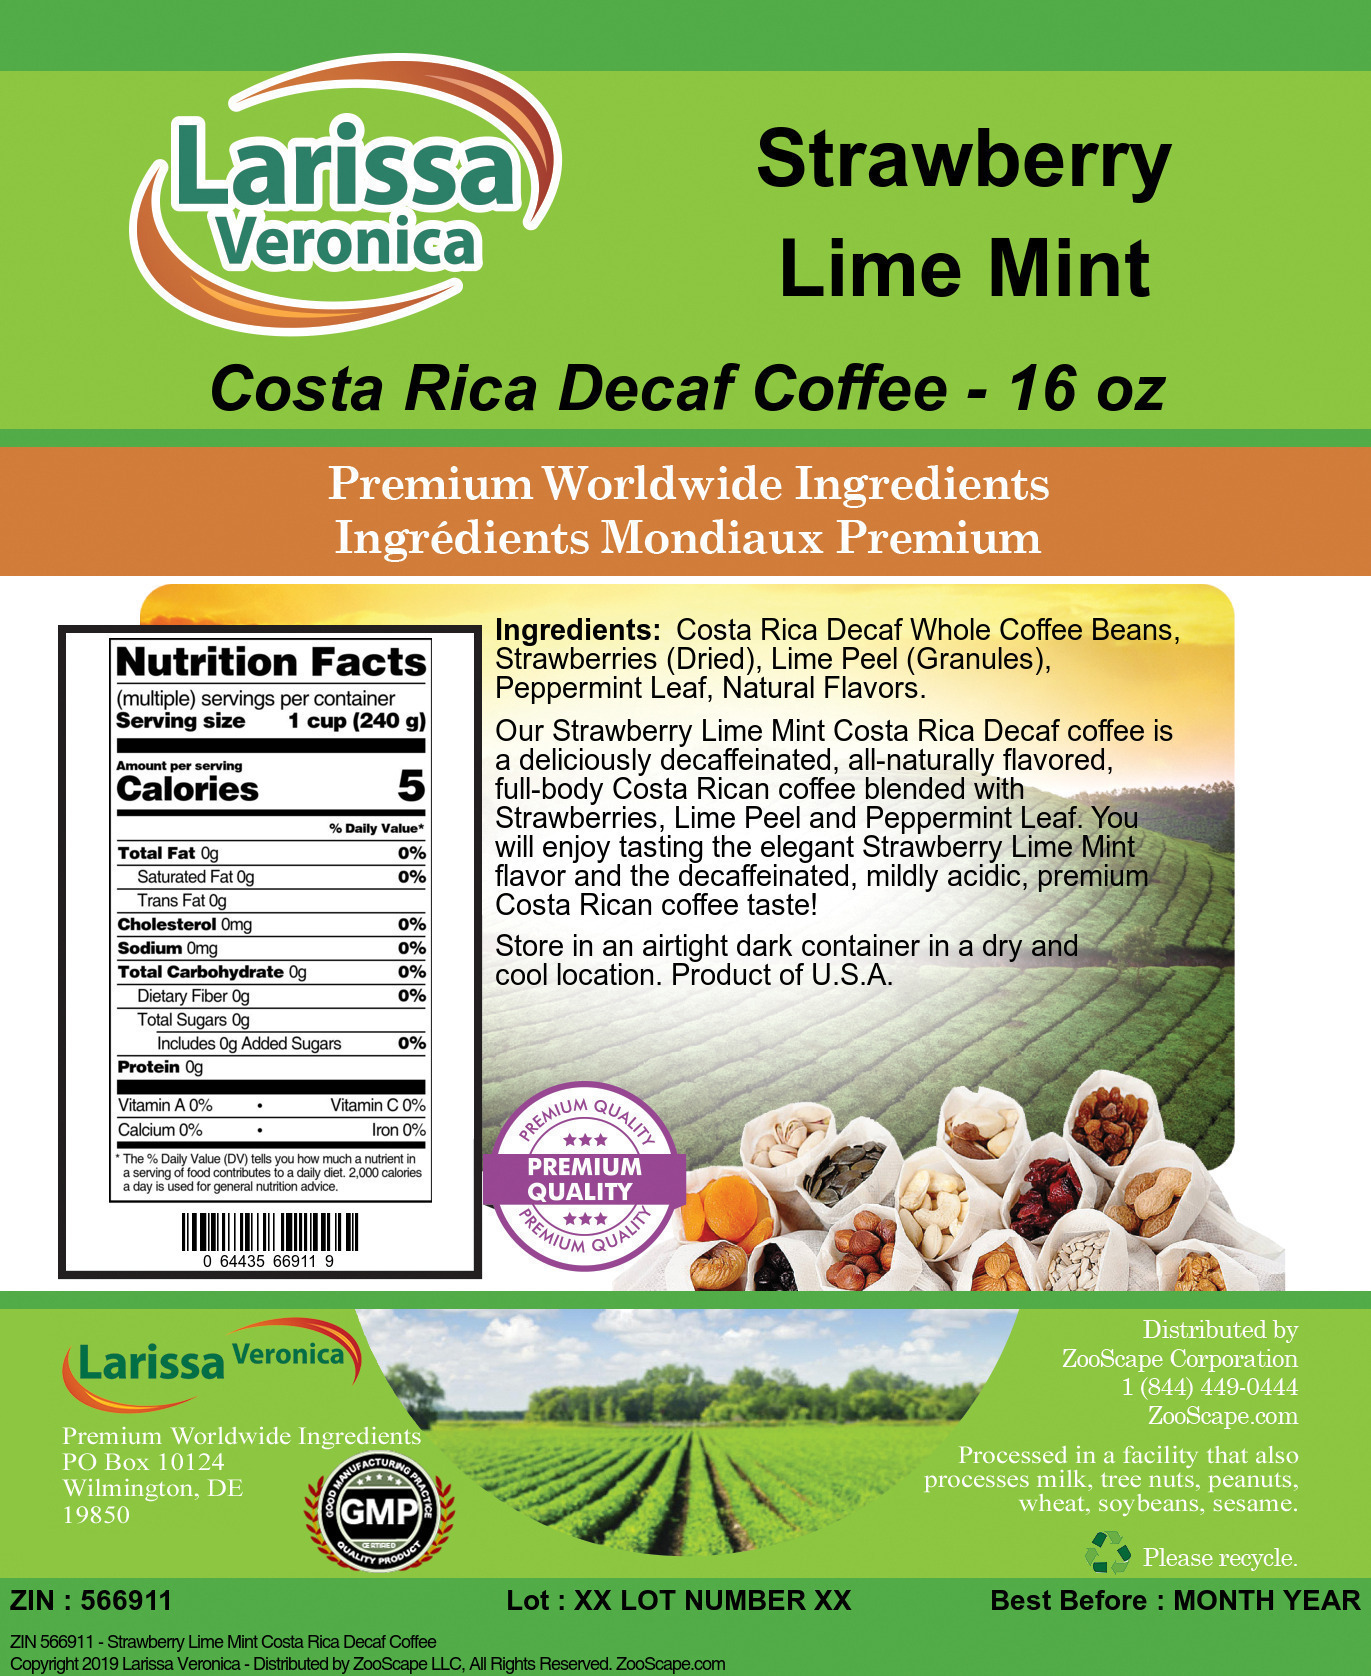 Strawberry Lime Mint Costa Rica Decaf Coffee - Label